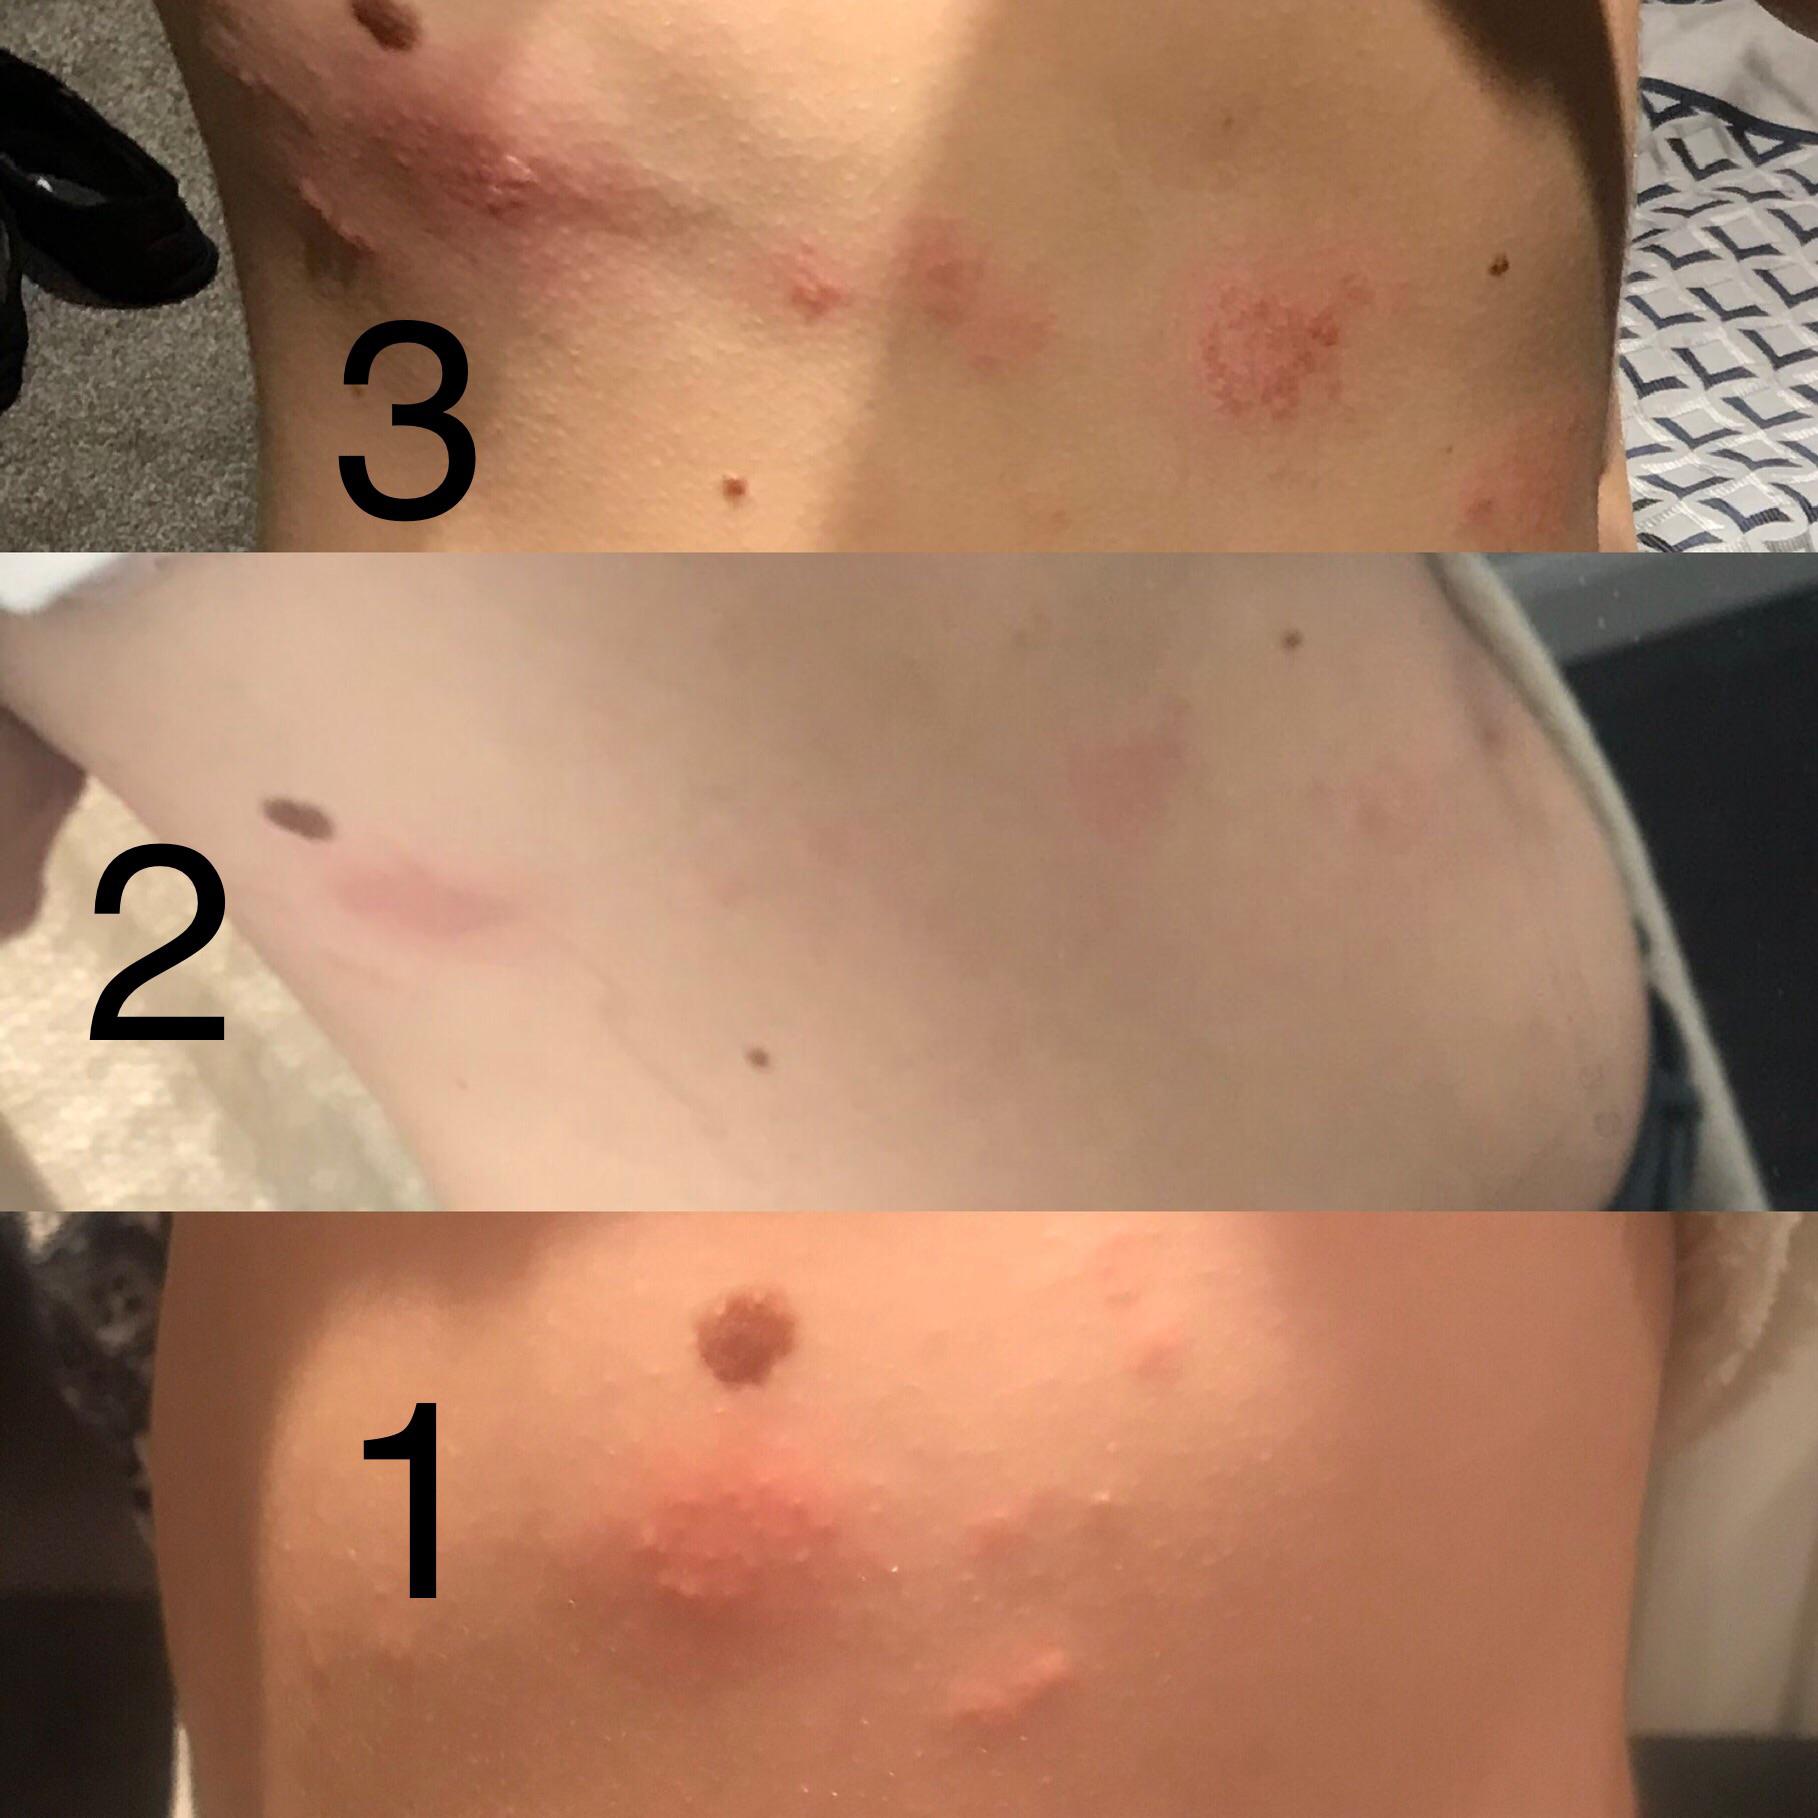 My shingles progression. Just in case it helps others to recognise it ...